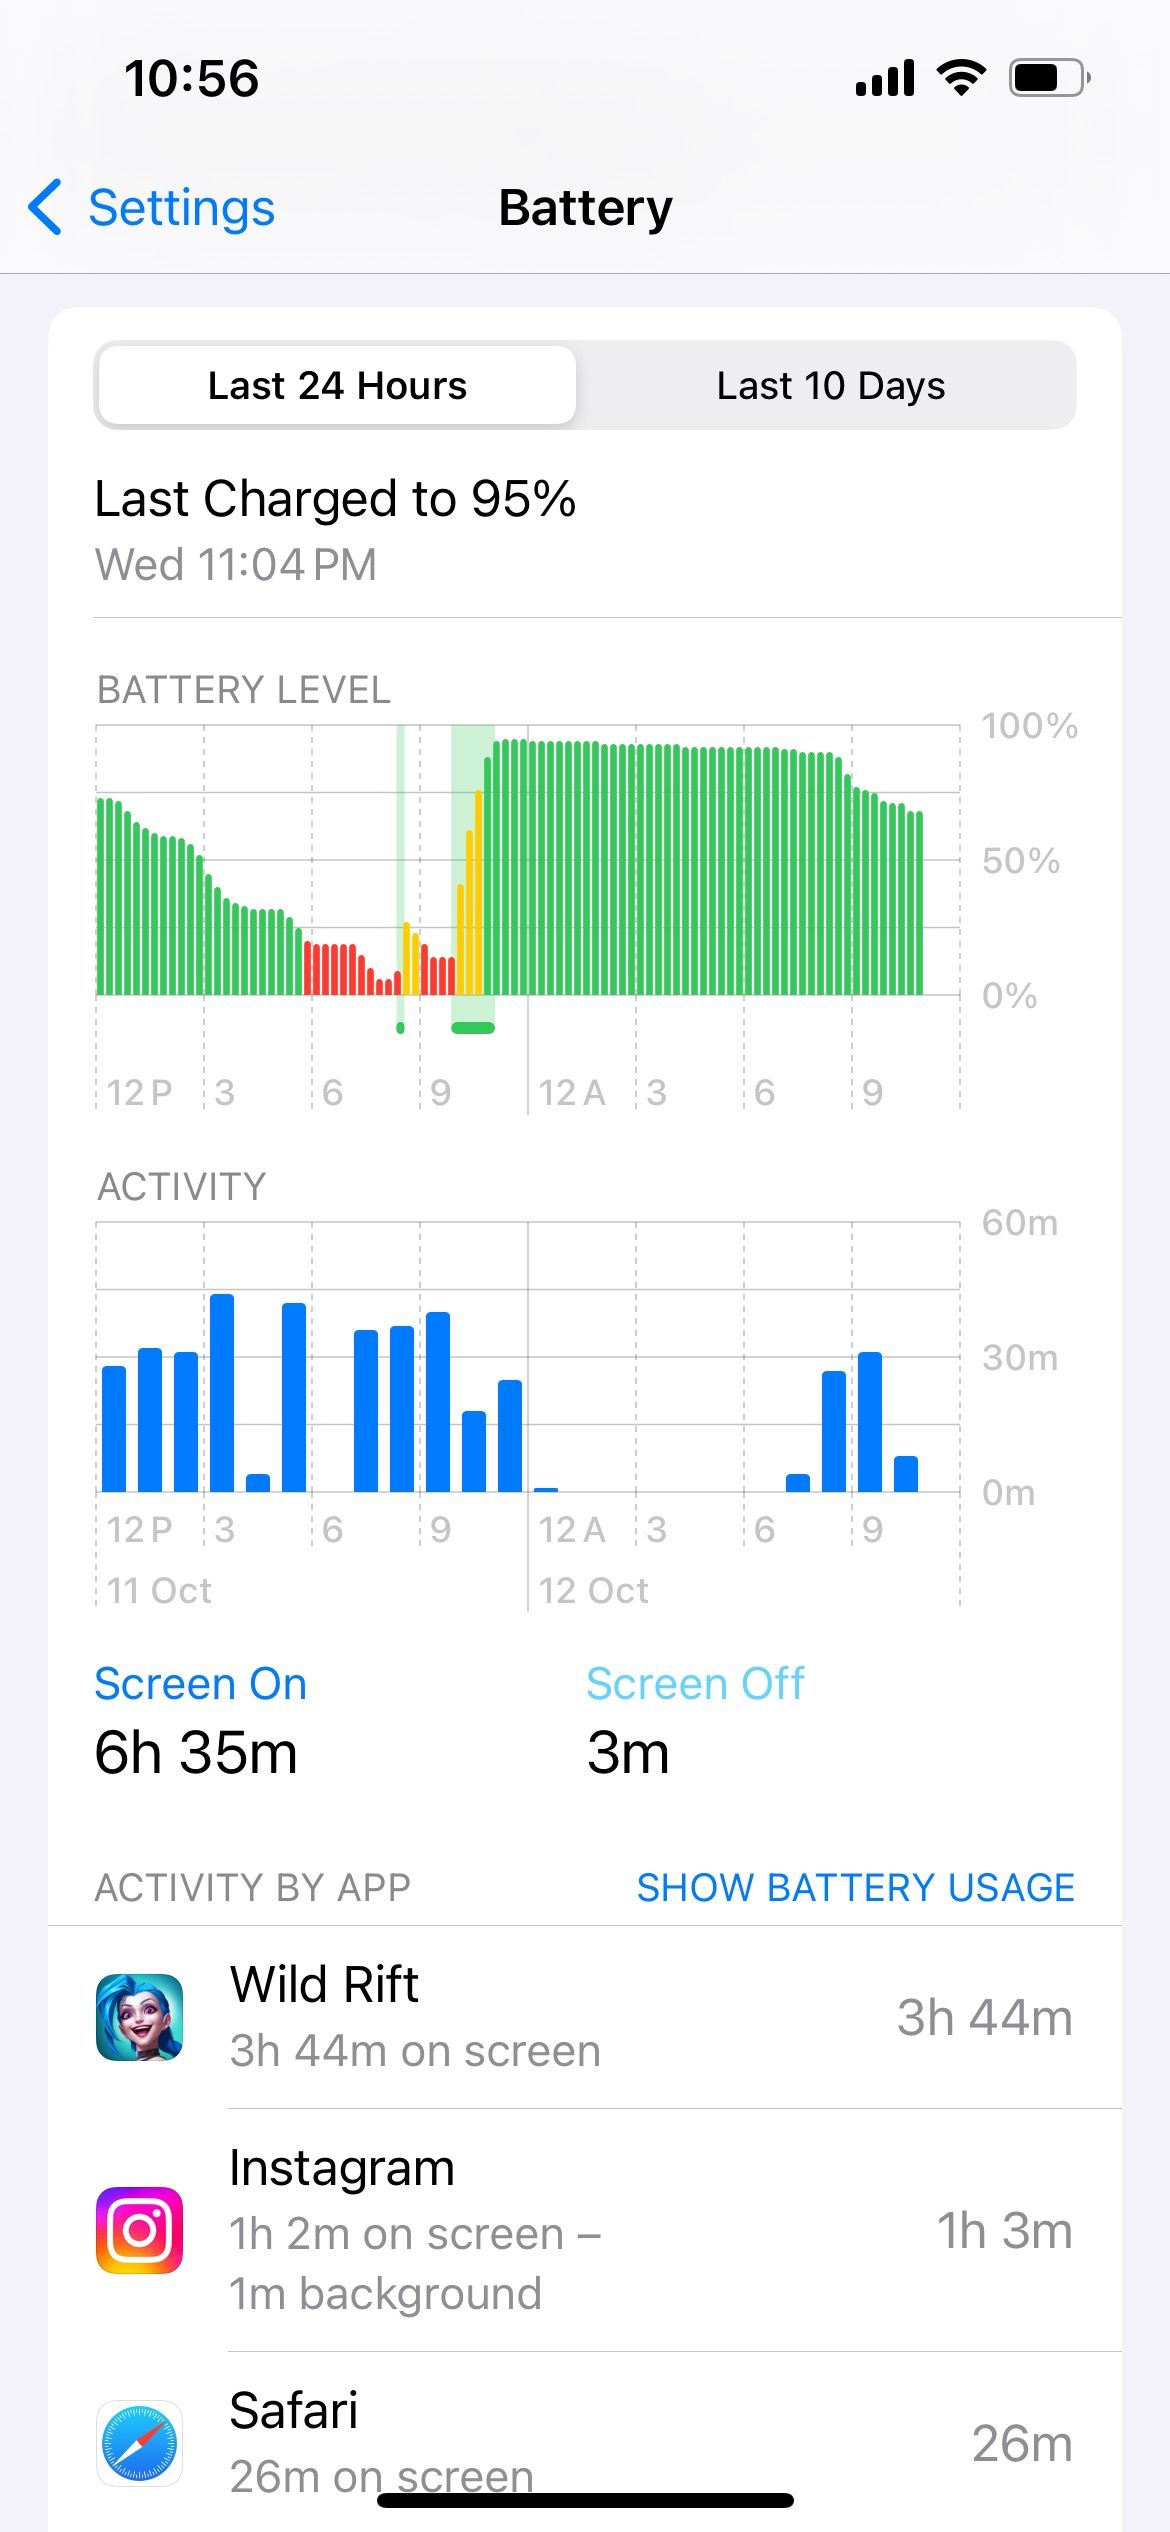 iphone battery usage by activity